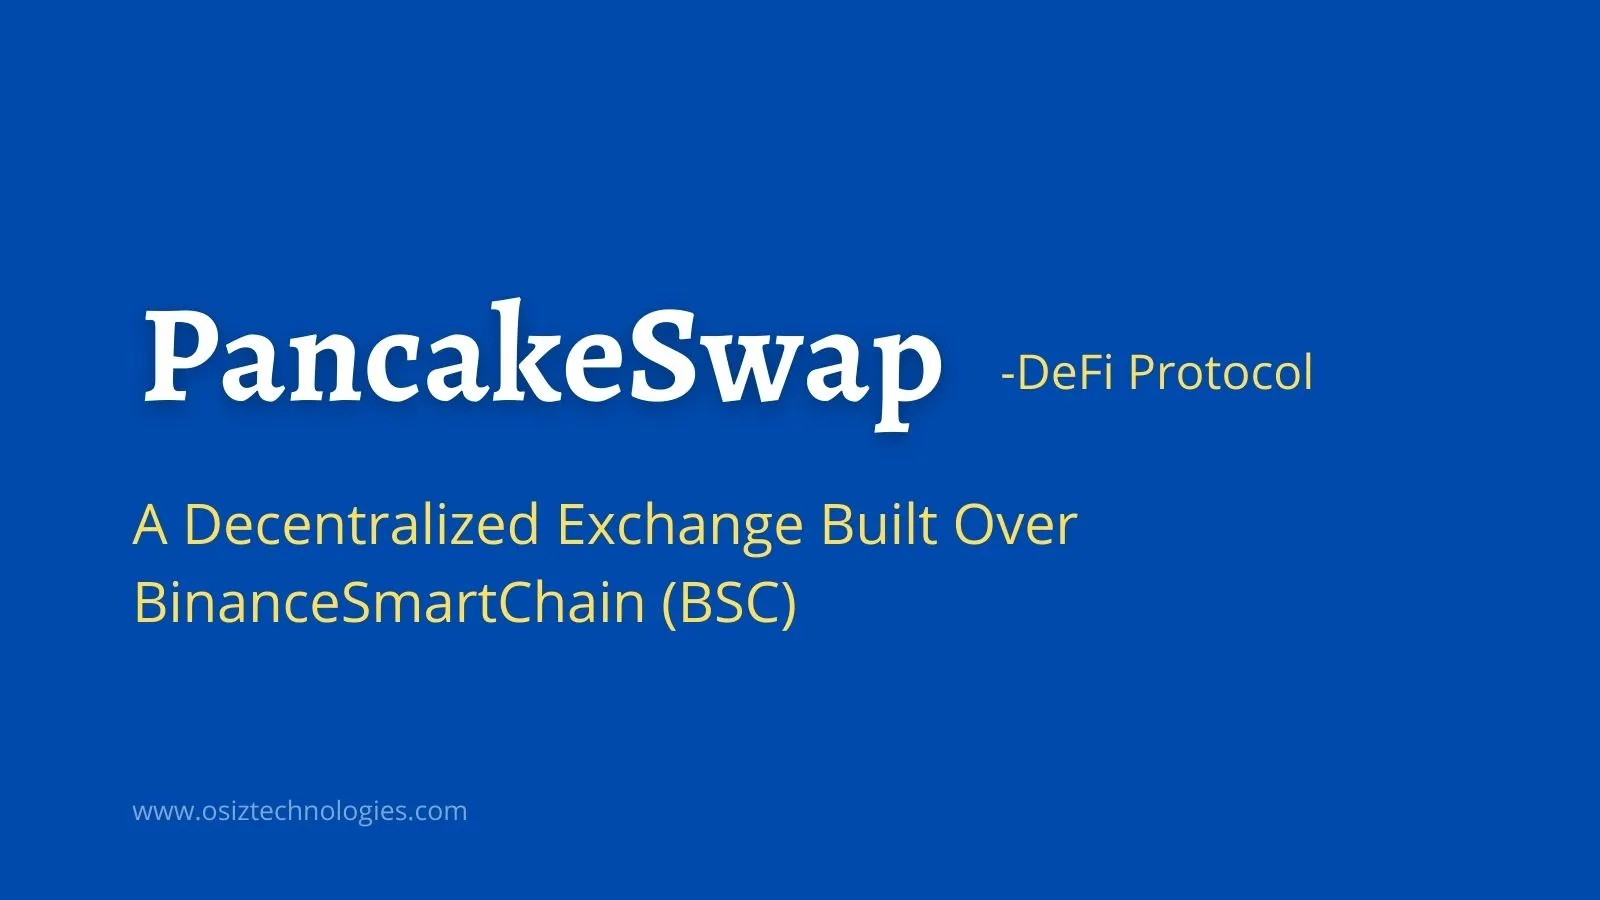 What are the business benefits of starting a DeFi Exchange like PancakeSwap?